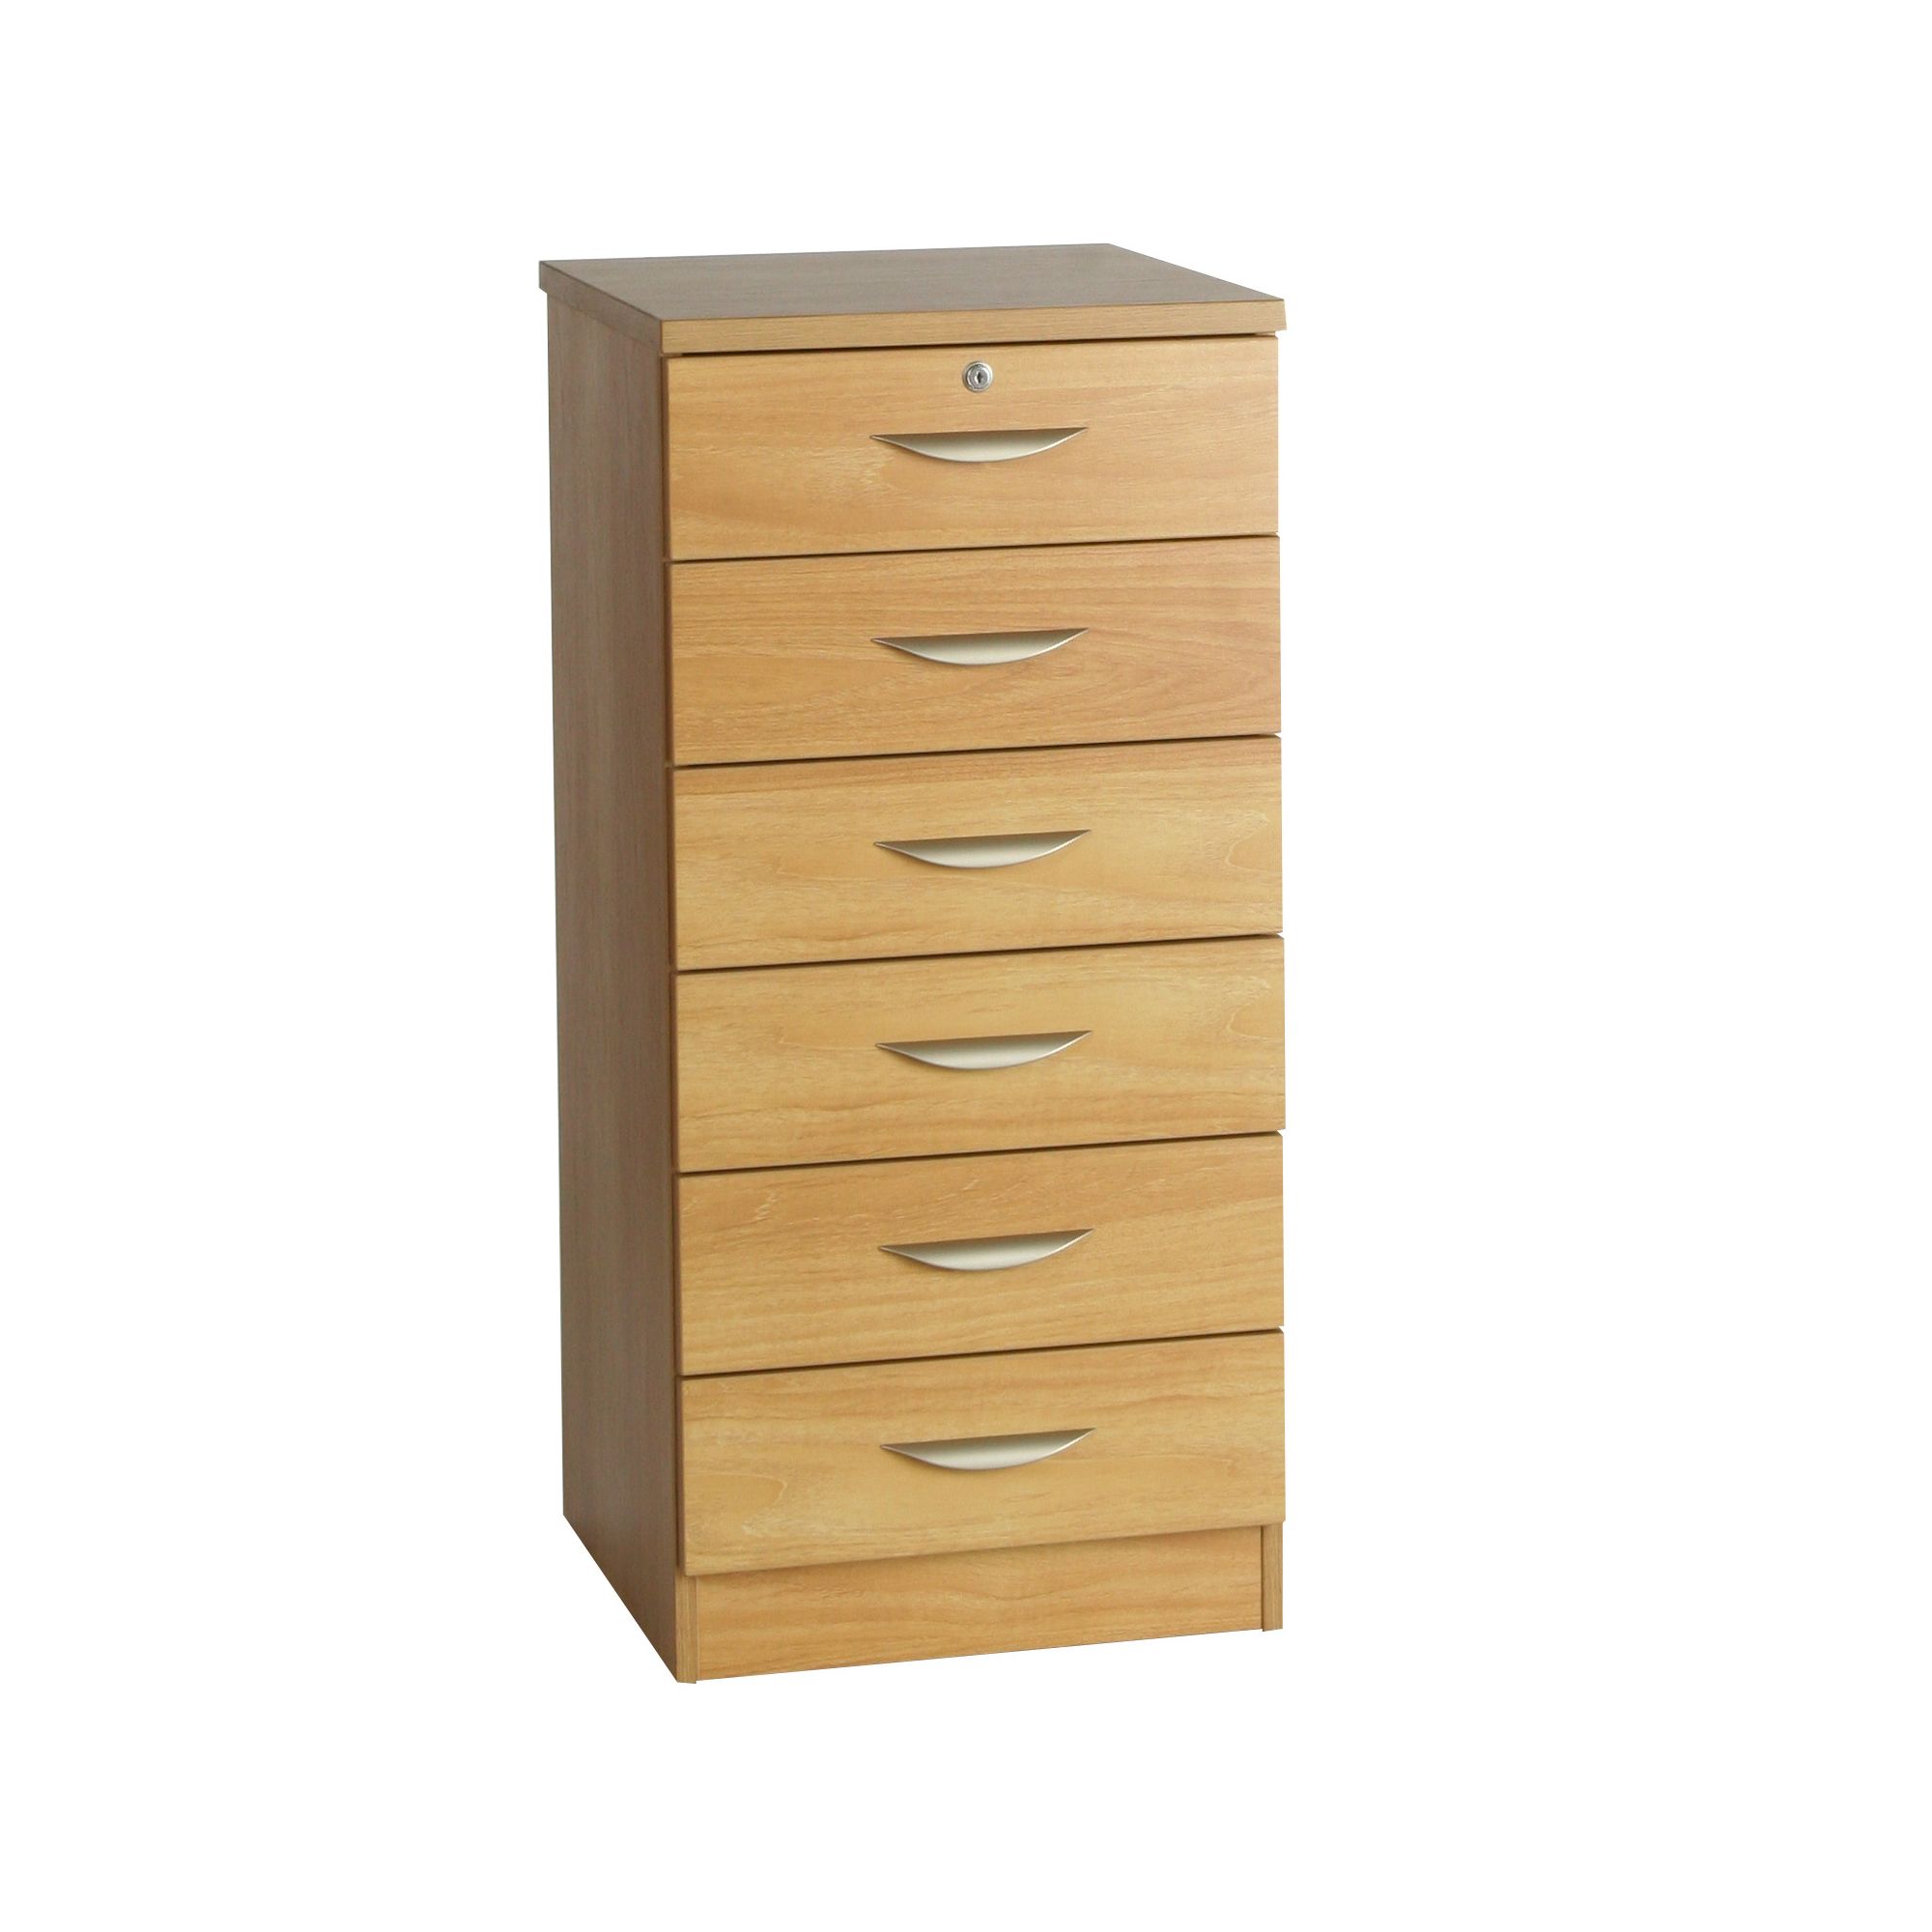 R White Cabinets Six Drawer Wooden Home Office Unit - English Oak at Tesco Direct